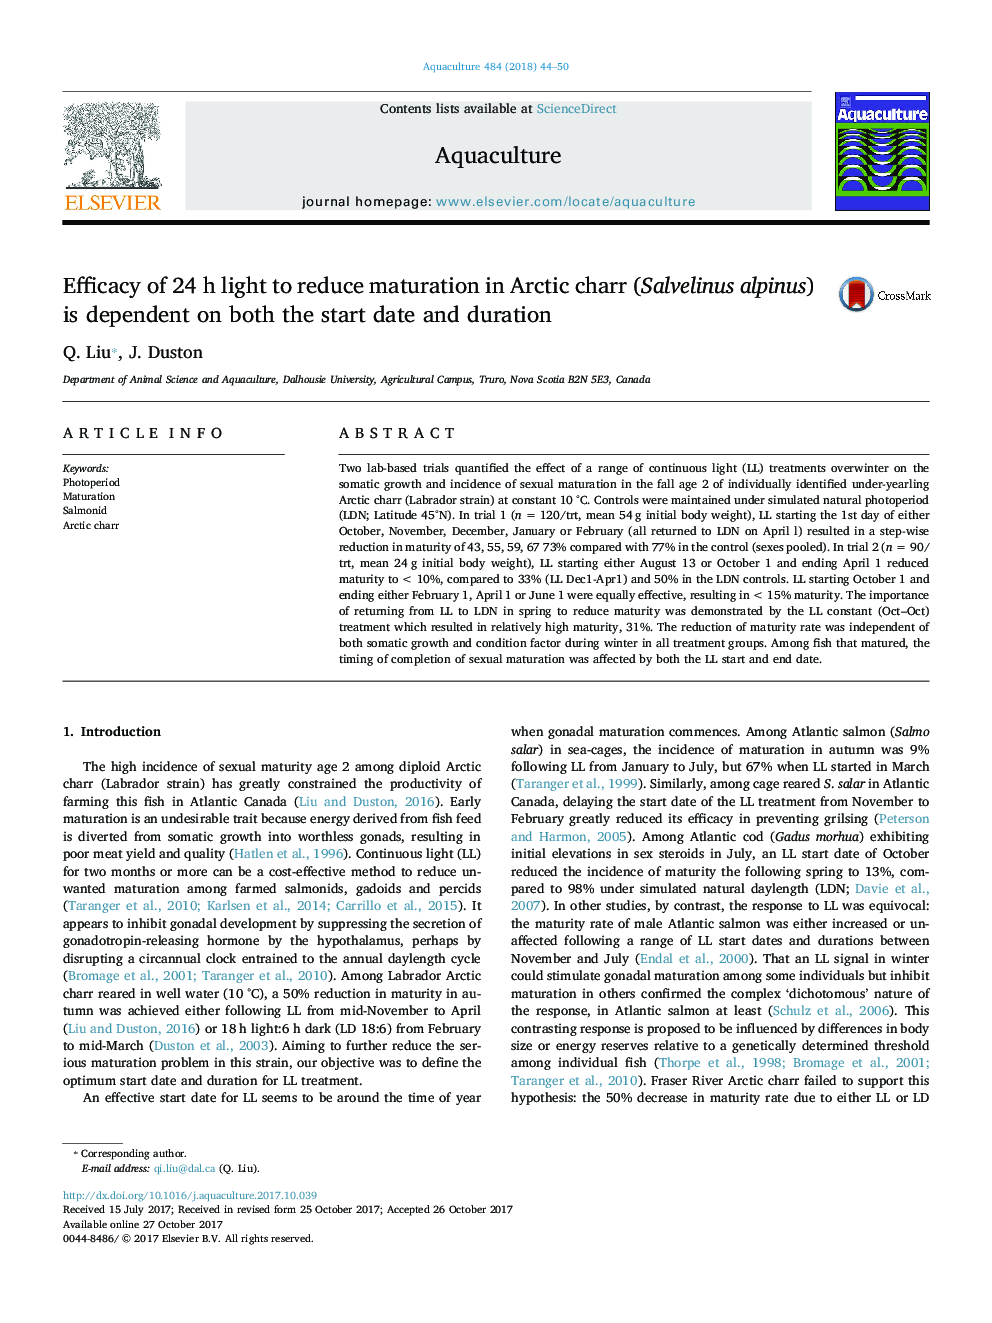 Efficacy of 24Â h light to reduce maturation in Arctic charr (Salvelinus alpinus) is dependent on both the start date and duration